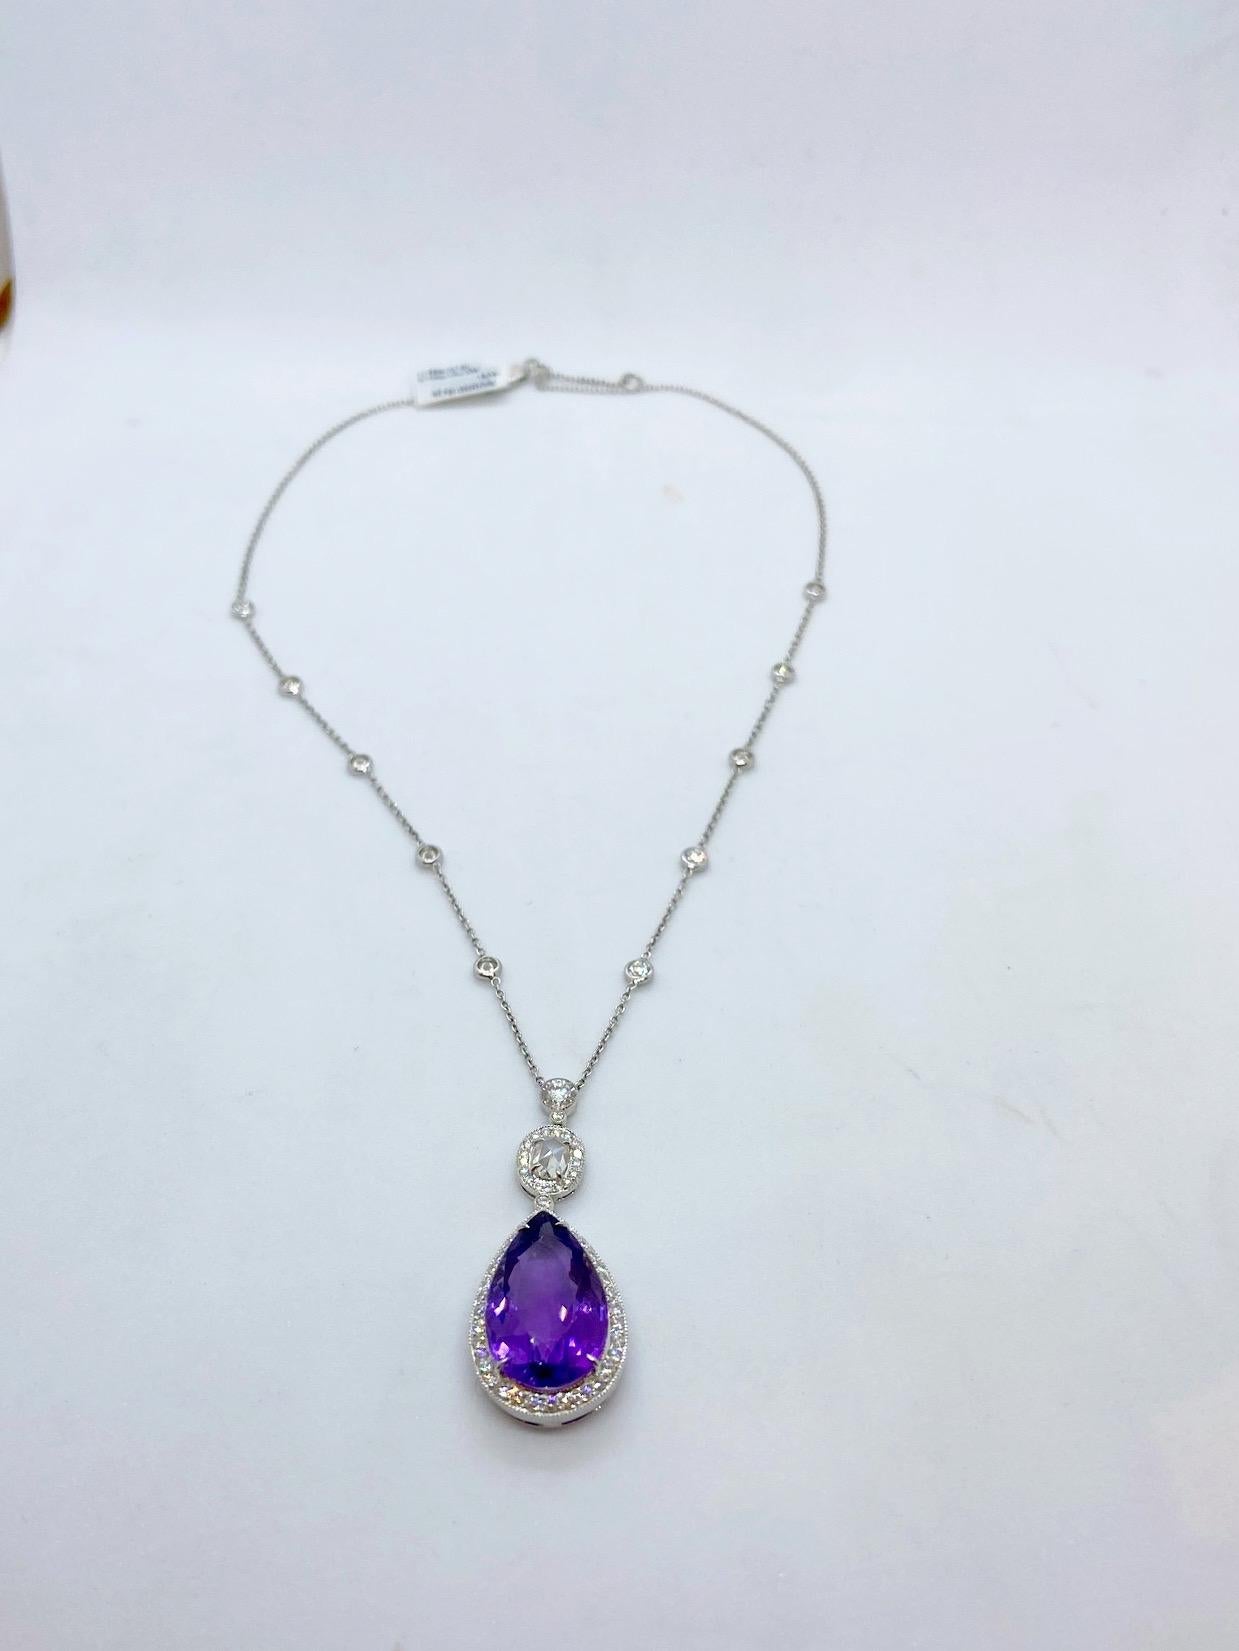 Cellini Jewelers NYC 18 karat white gold pendant is designed with a pear shaped Amethyst  drop set in a Diamond bezel. The center  Amethyst stone is joined with an oval rose cut  and a round rose cut Diamond. Both are set in Diamond bezels. The drop